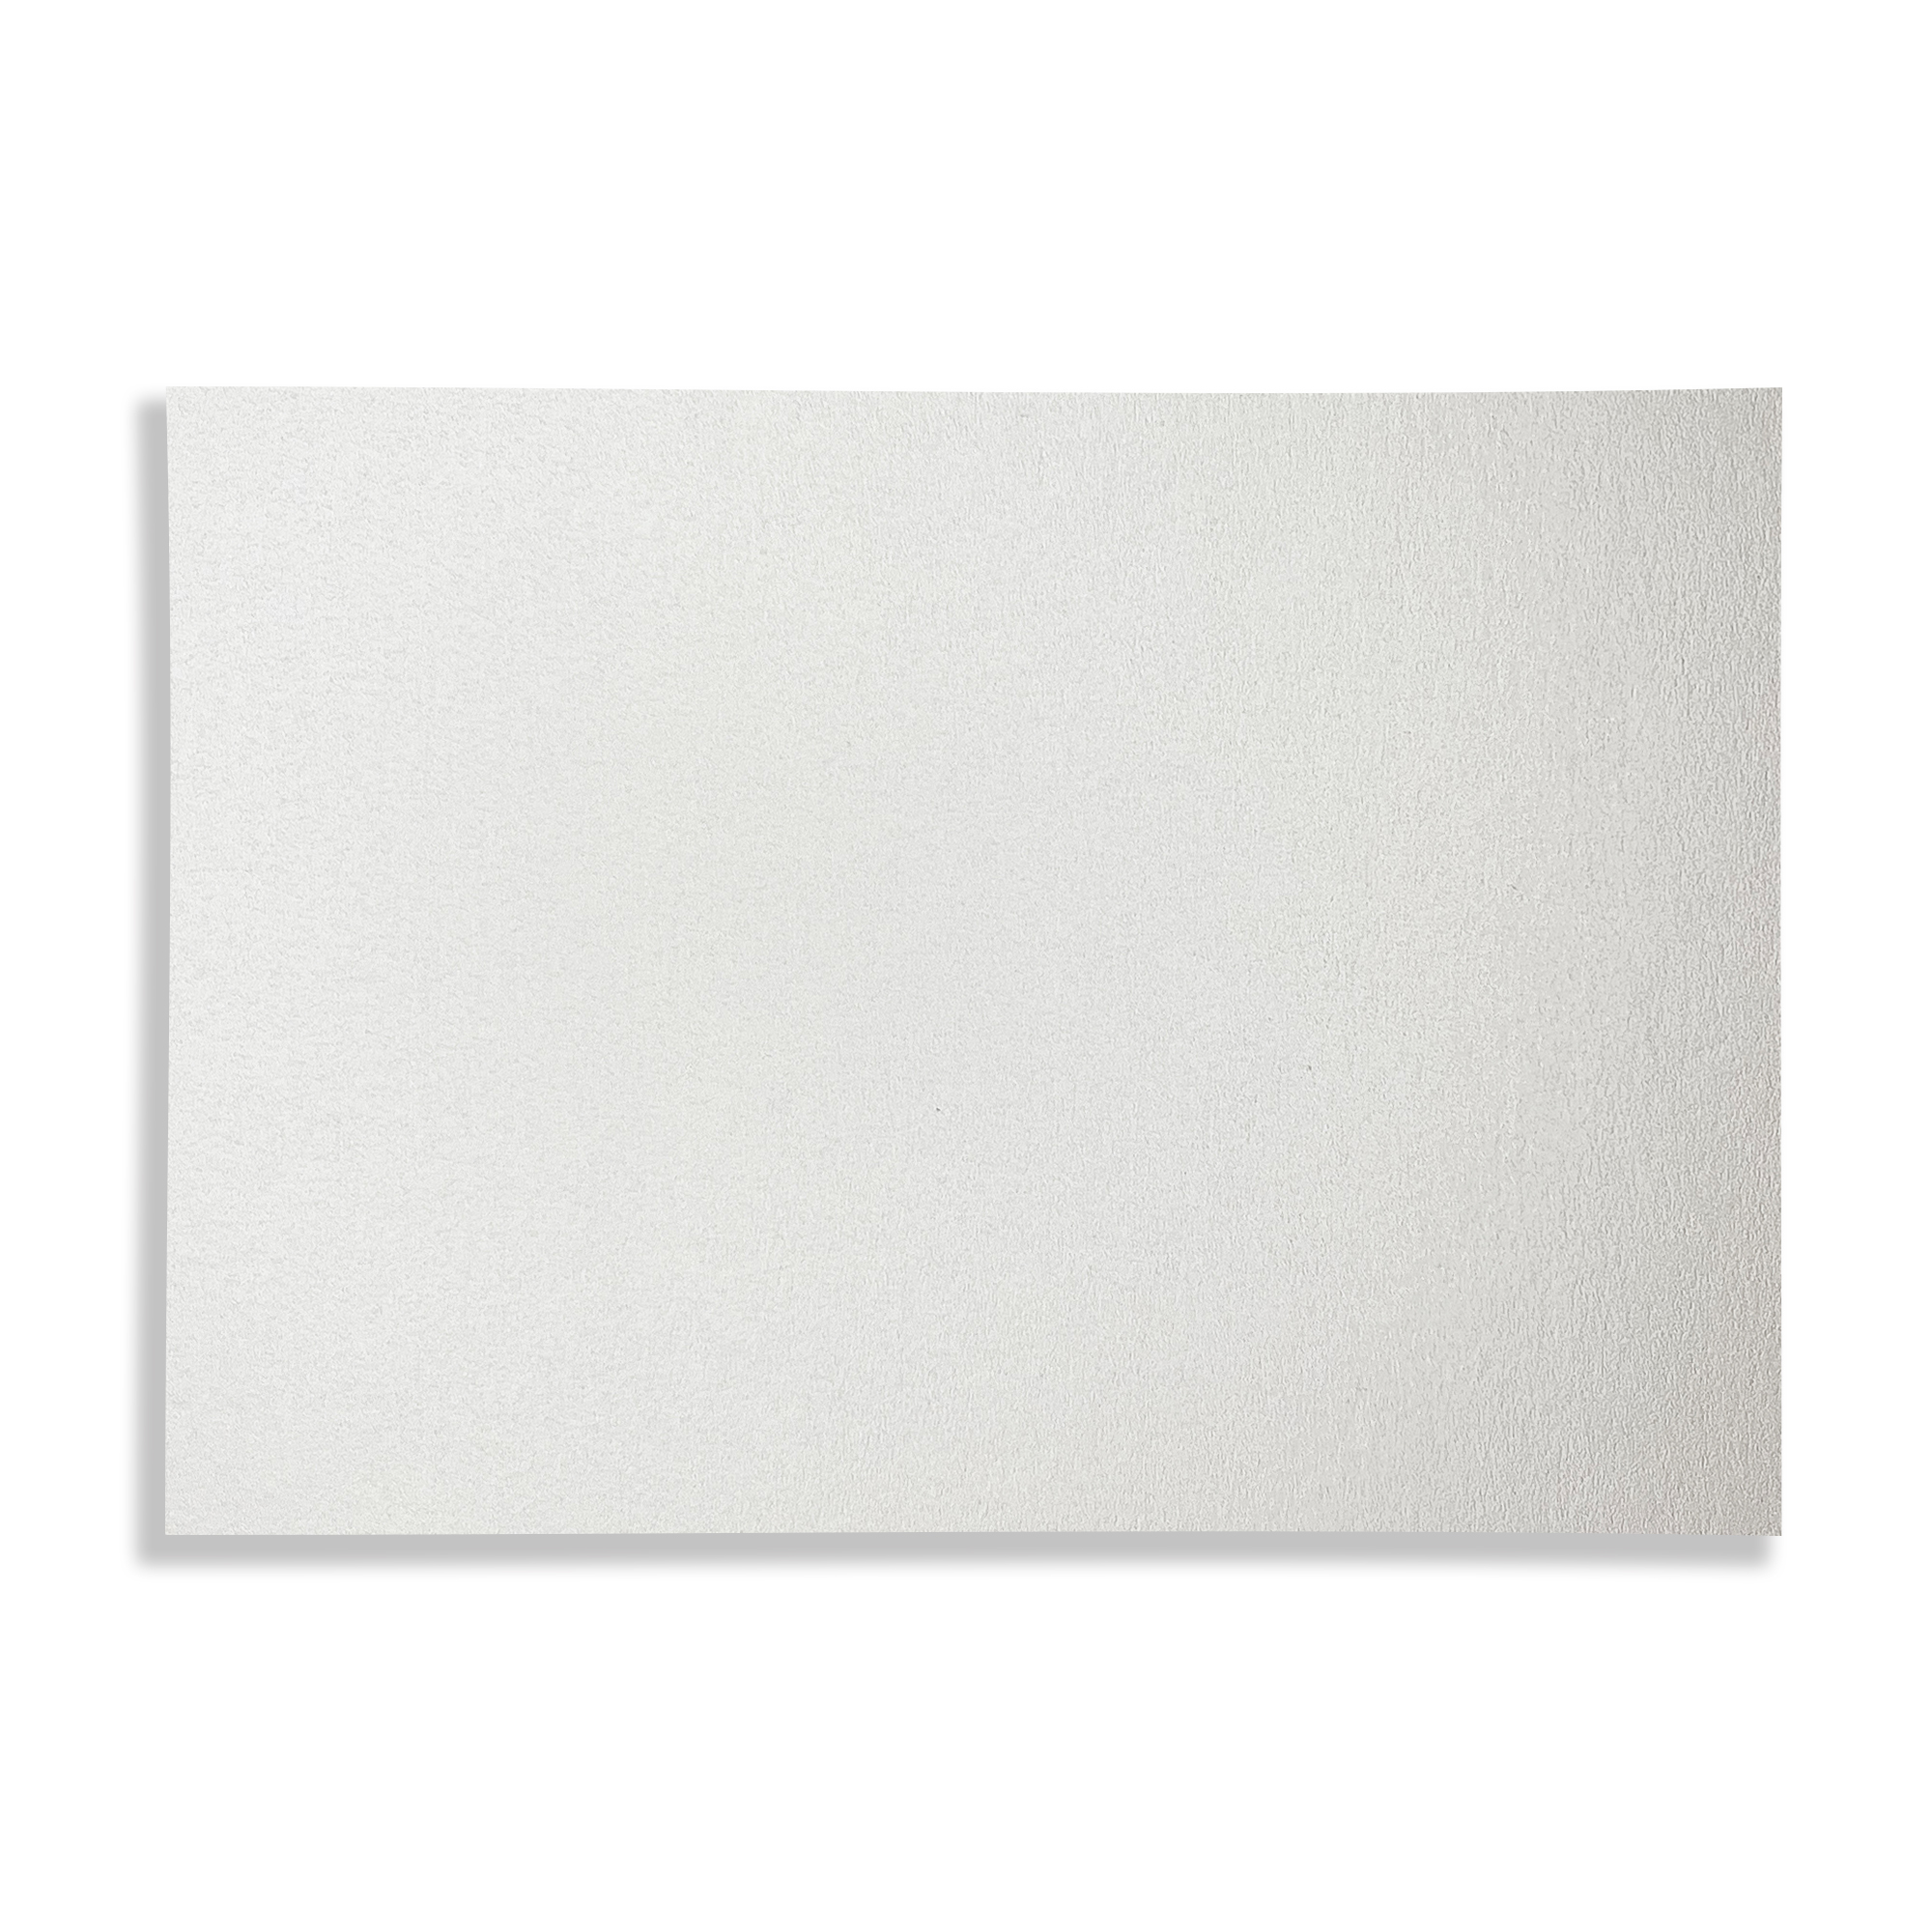 A5 COSMOS Pearl 300gsm Double-Sided Card Quartz White